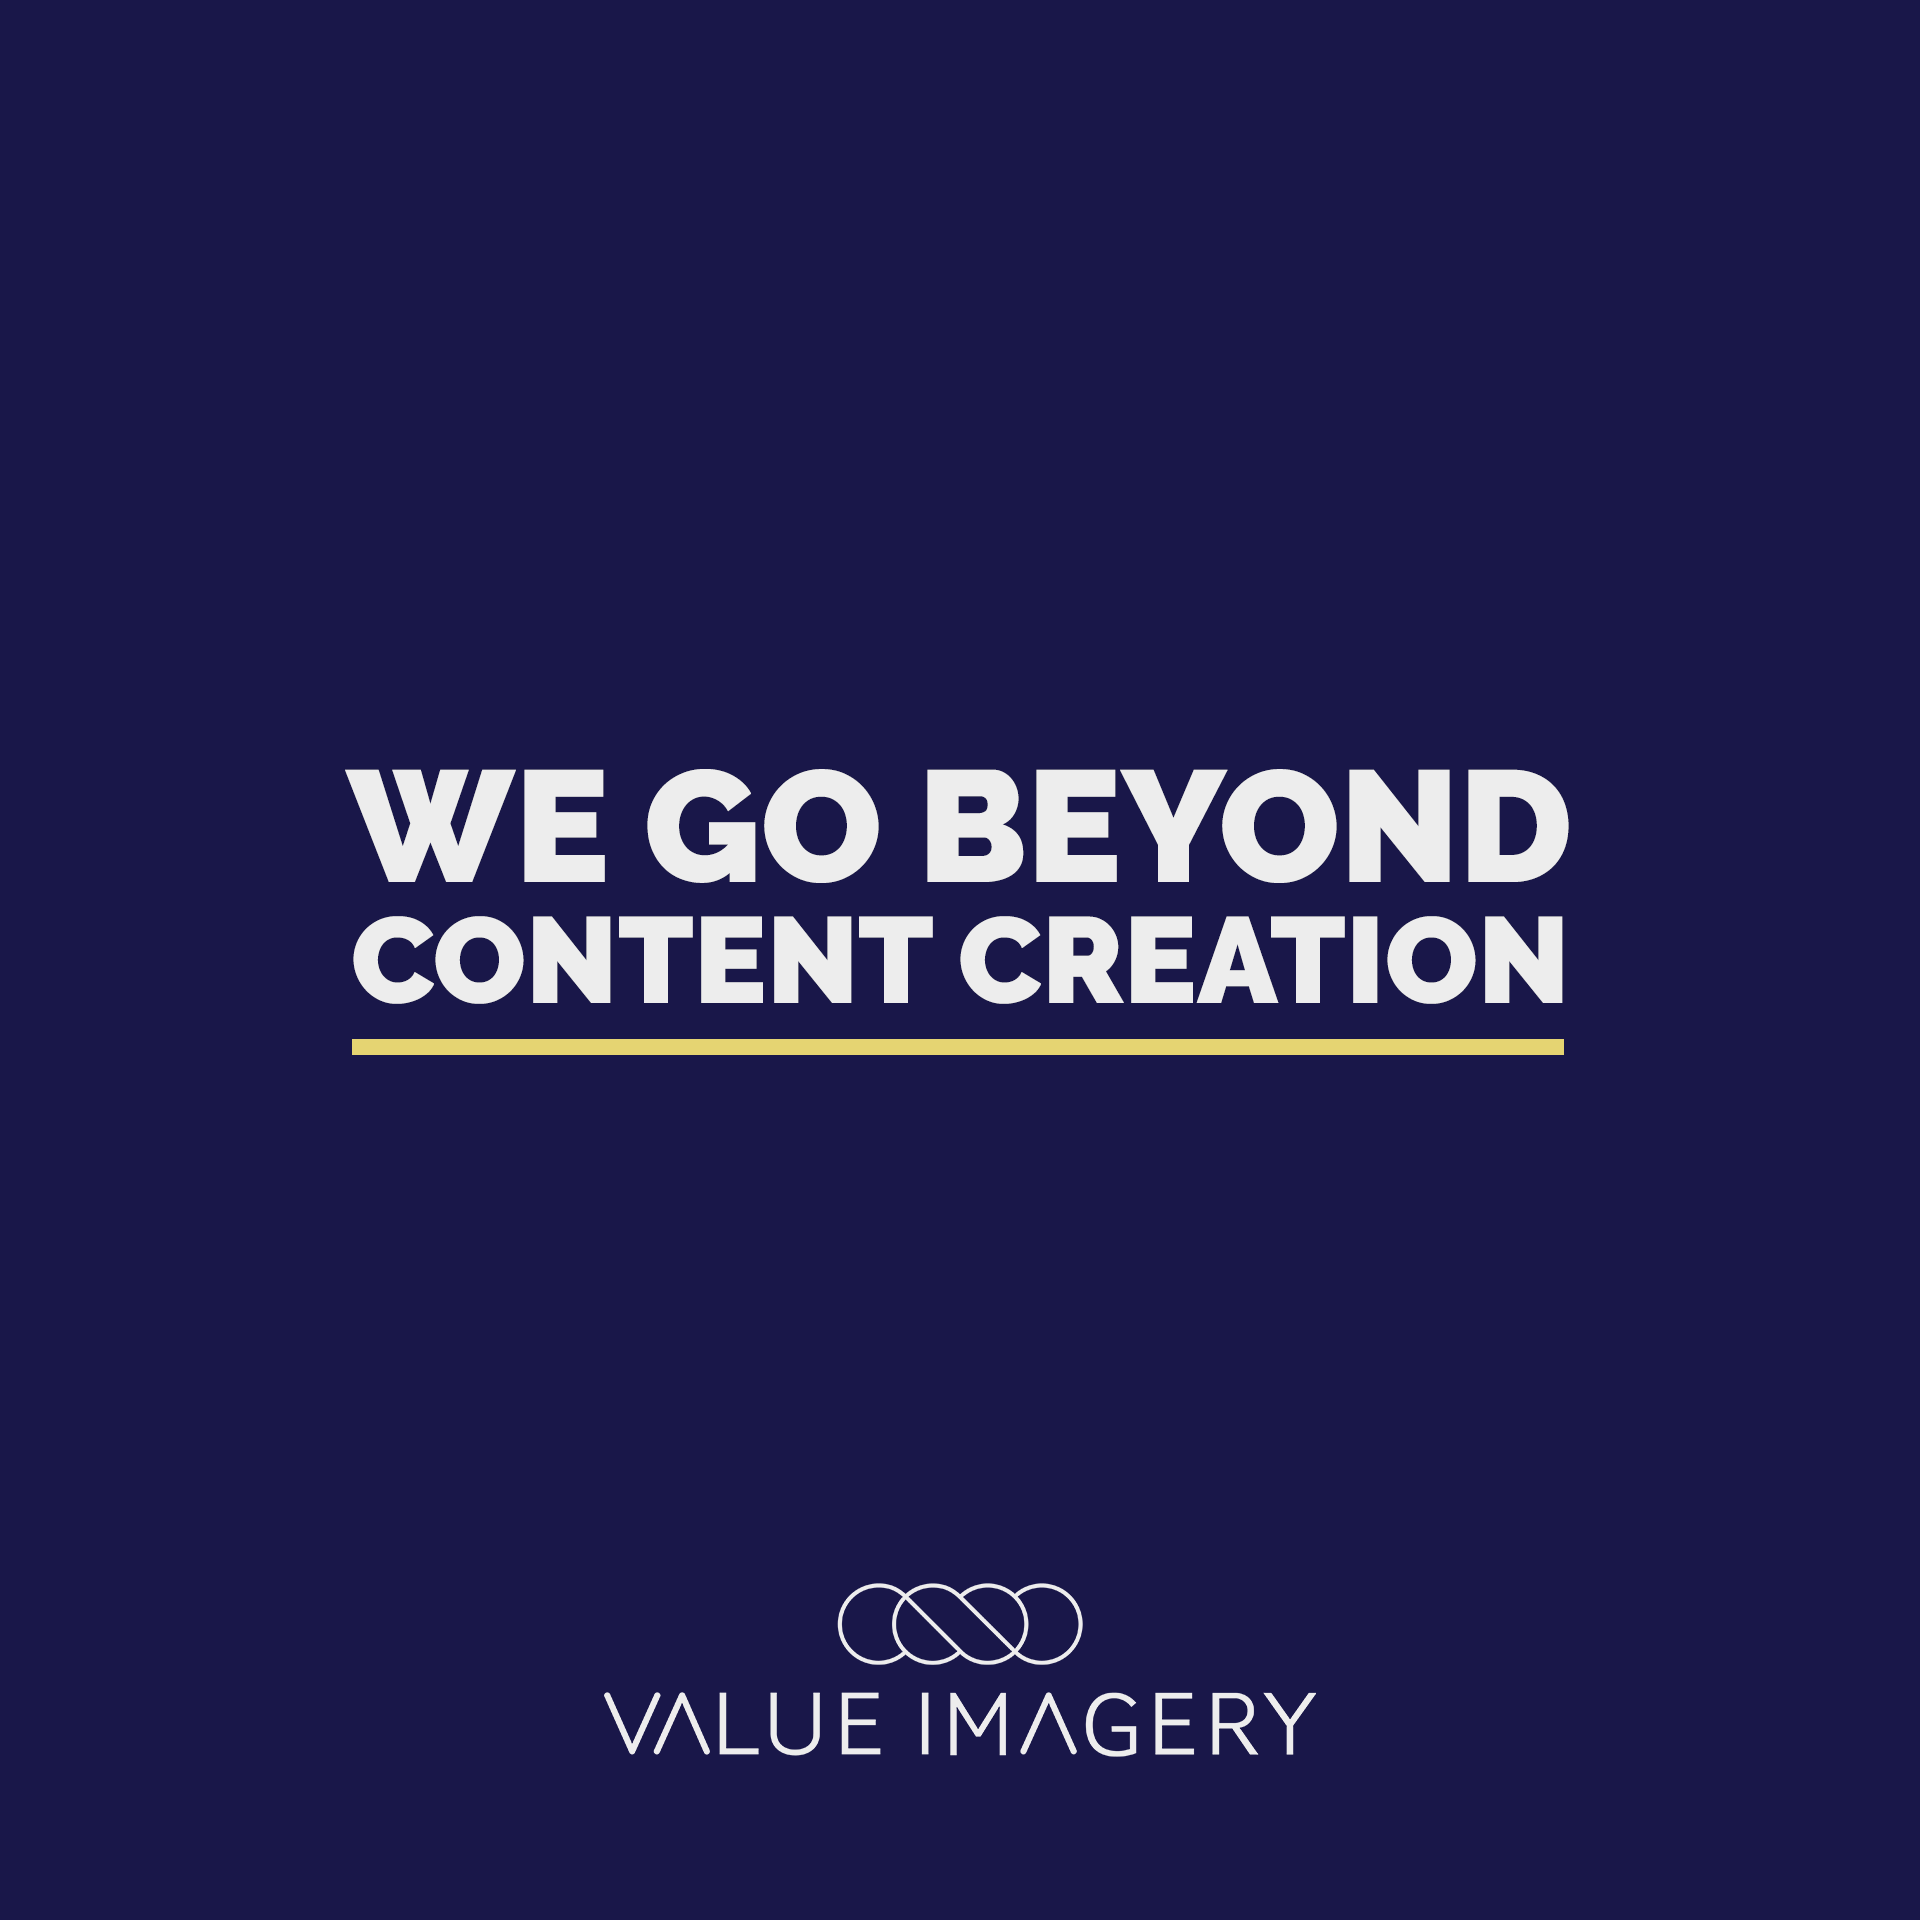 valueimagery homepage